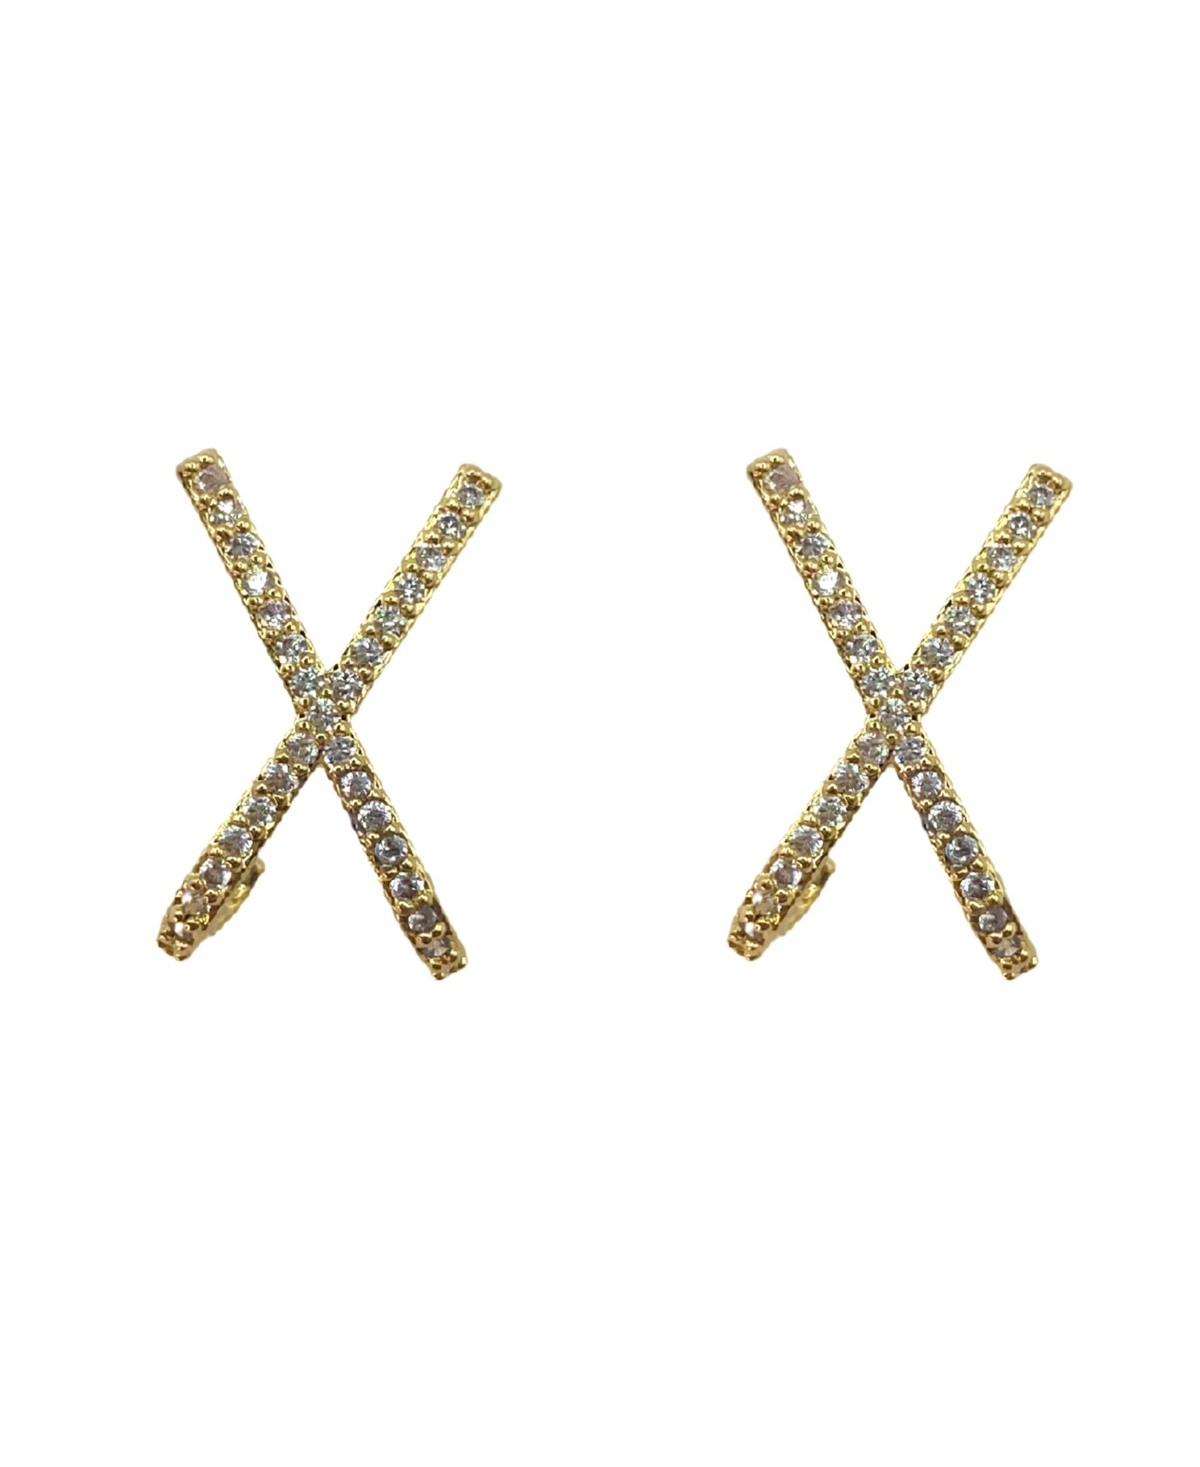 Accessory Concierge Women's Pave Criss Cross Stud Earrings In Gold-tone